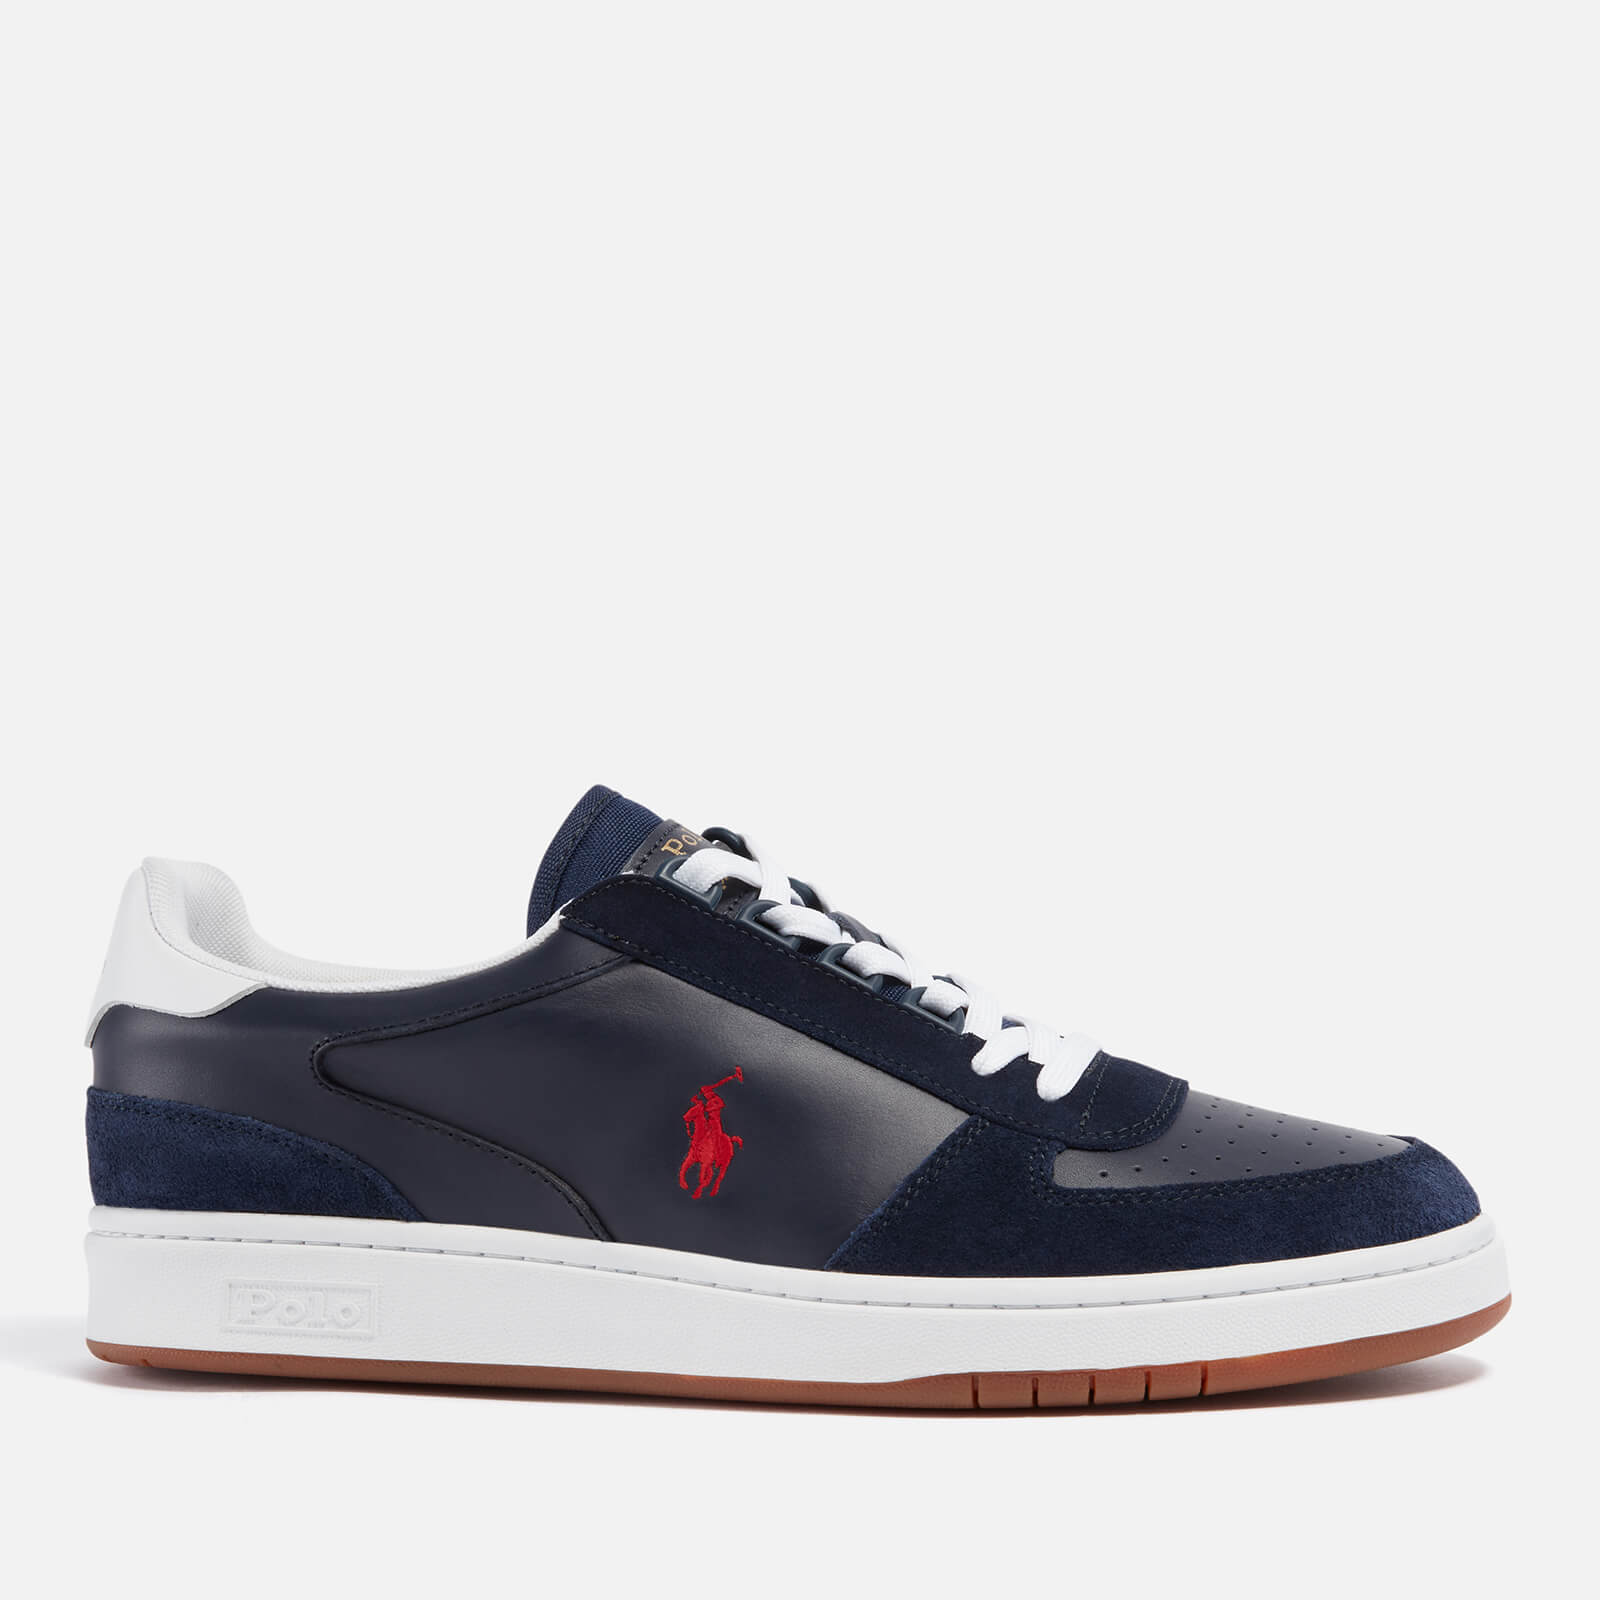 Polo Ralph Lauren Men’s Polo Court Leather/Suede Trainers - Newport Navy/RL2000 Red